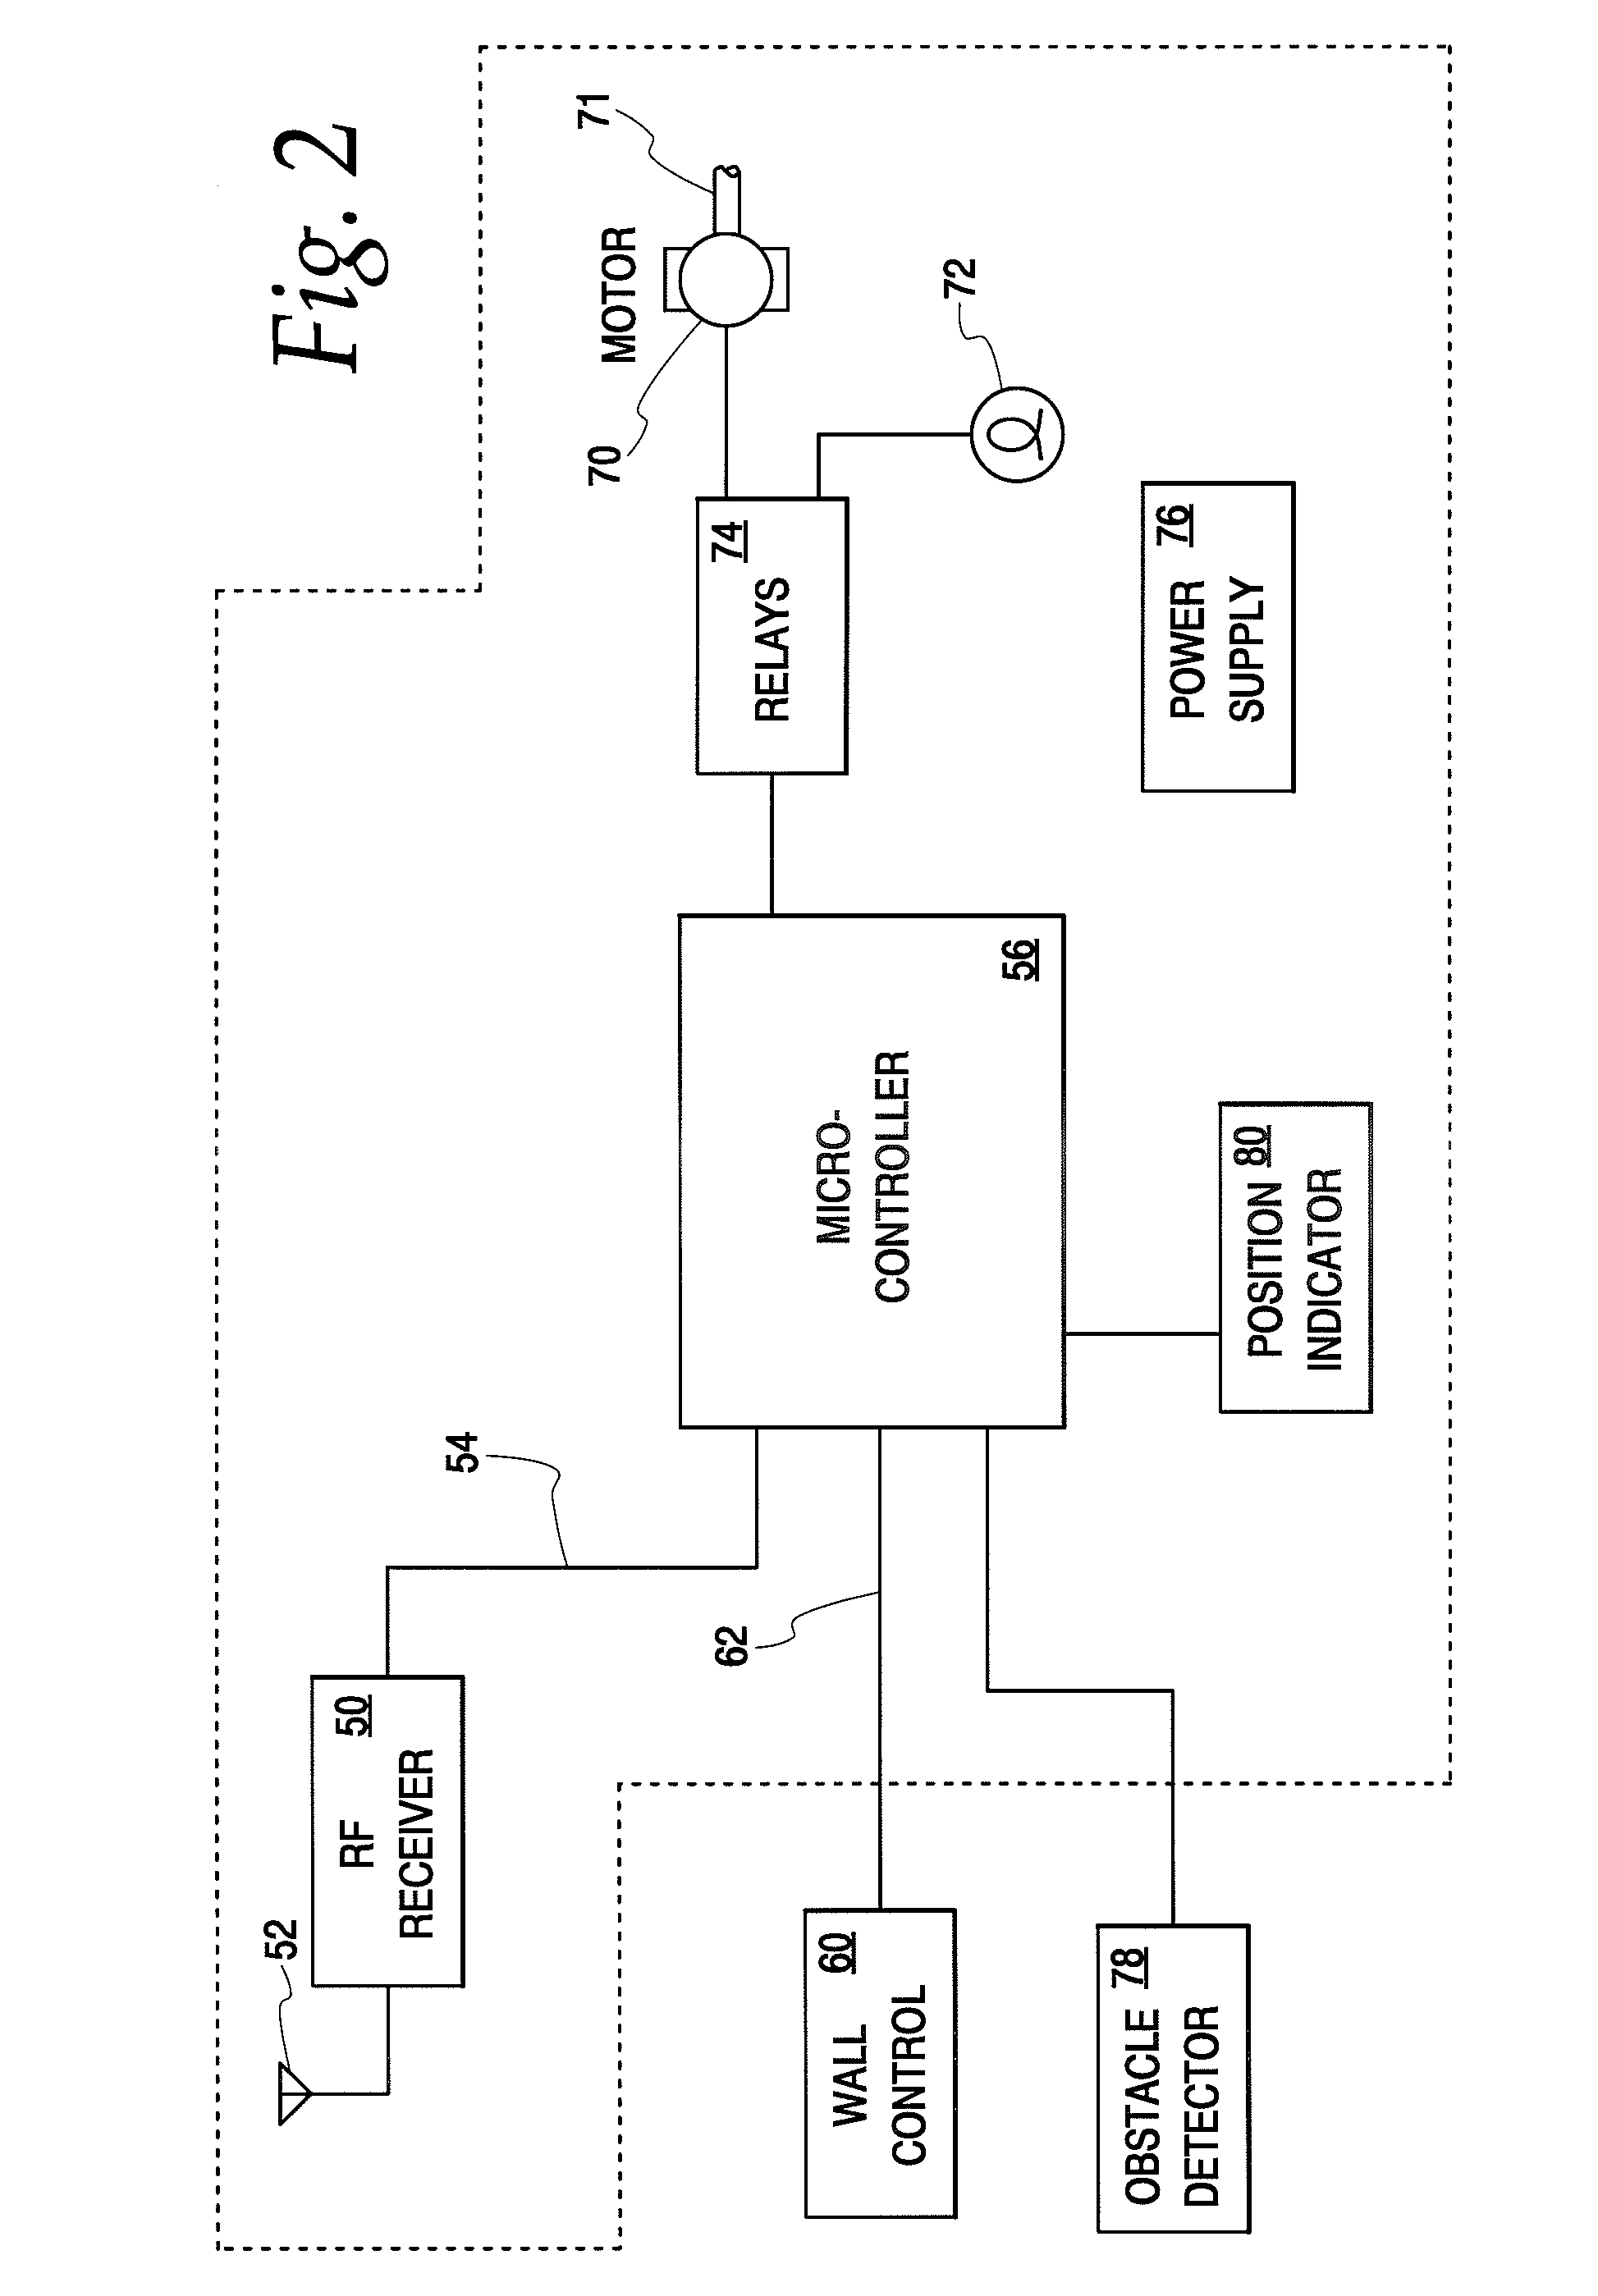 Method and apparatus for utilizing a transmitter having a range limitation to control a movable barrier operator